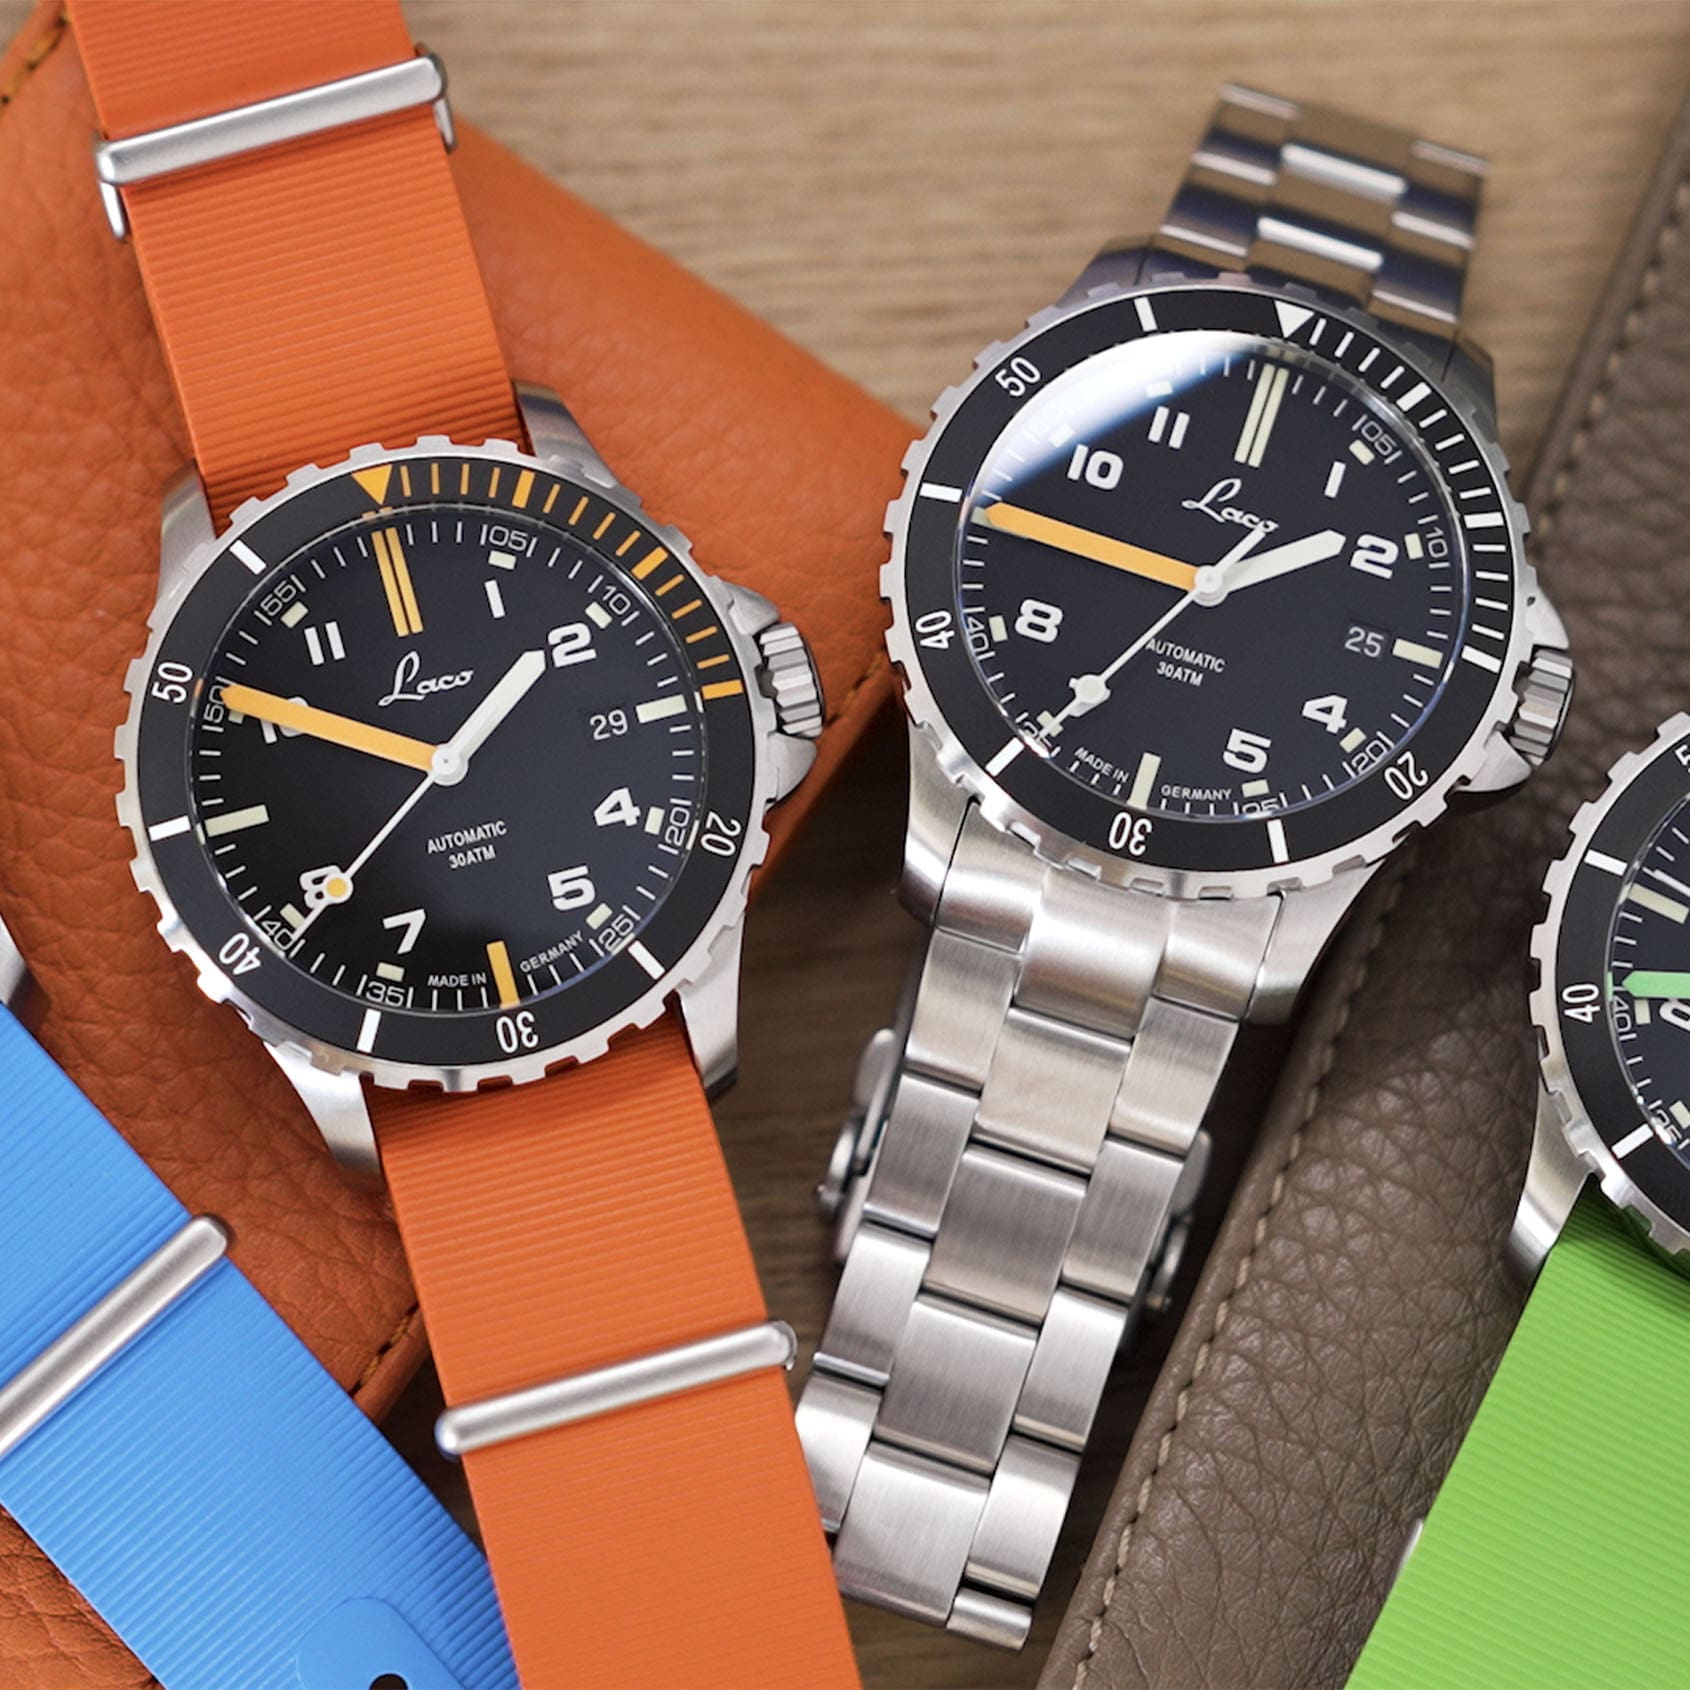 HANDS-ON: The Laco Scorpion 39 collection delivers rugged, 39mm dive watches with a sense of fun